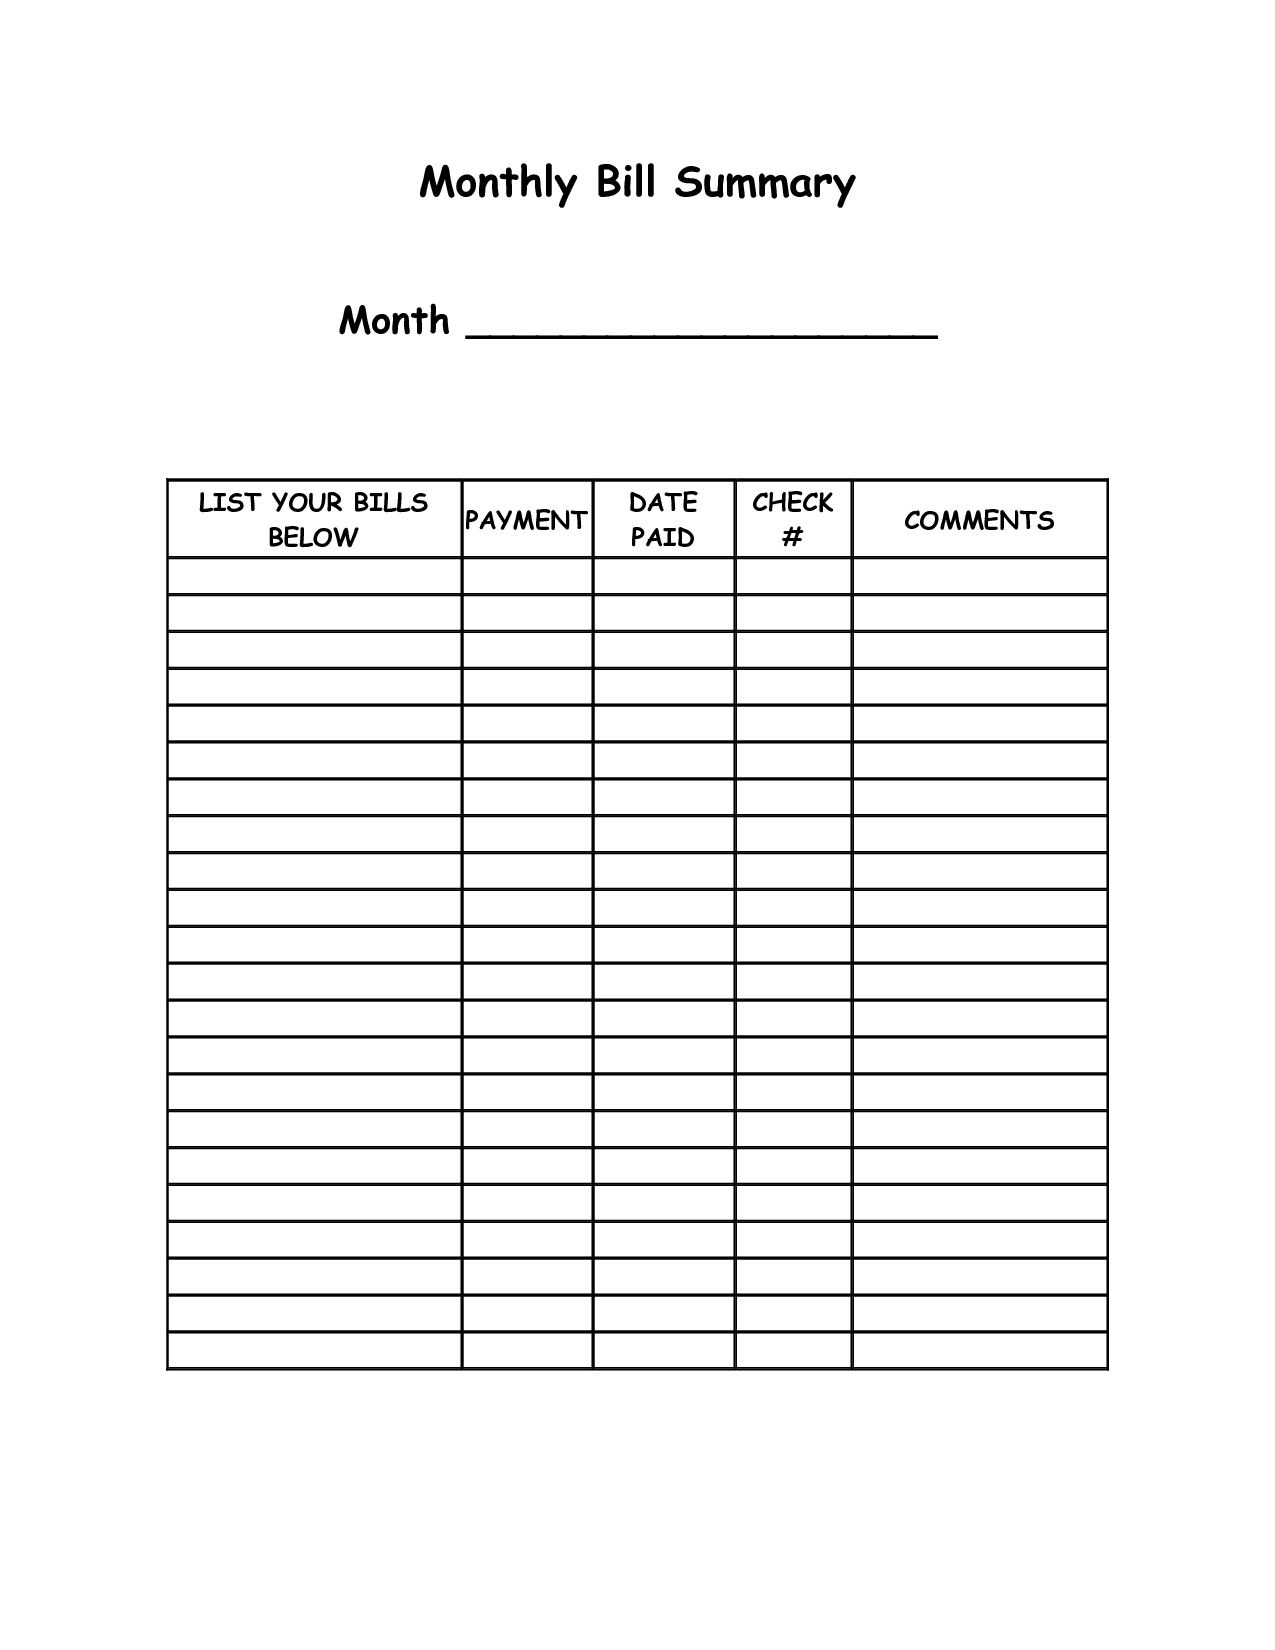 Blank Bill Payment Organizer | Monthly Bill Summary - Doc | Cats inside Blank Bill Calendar Printable Colorful